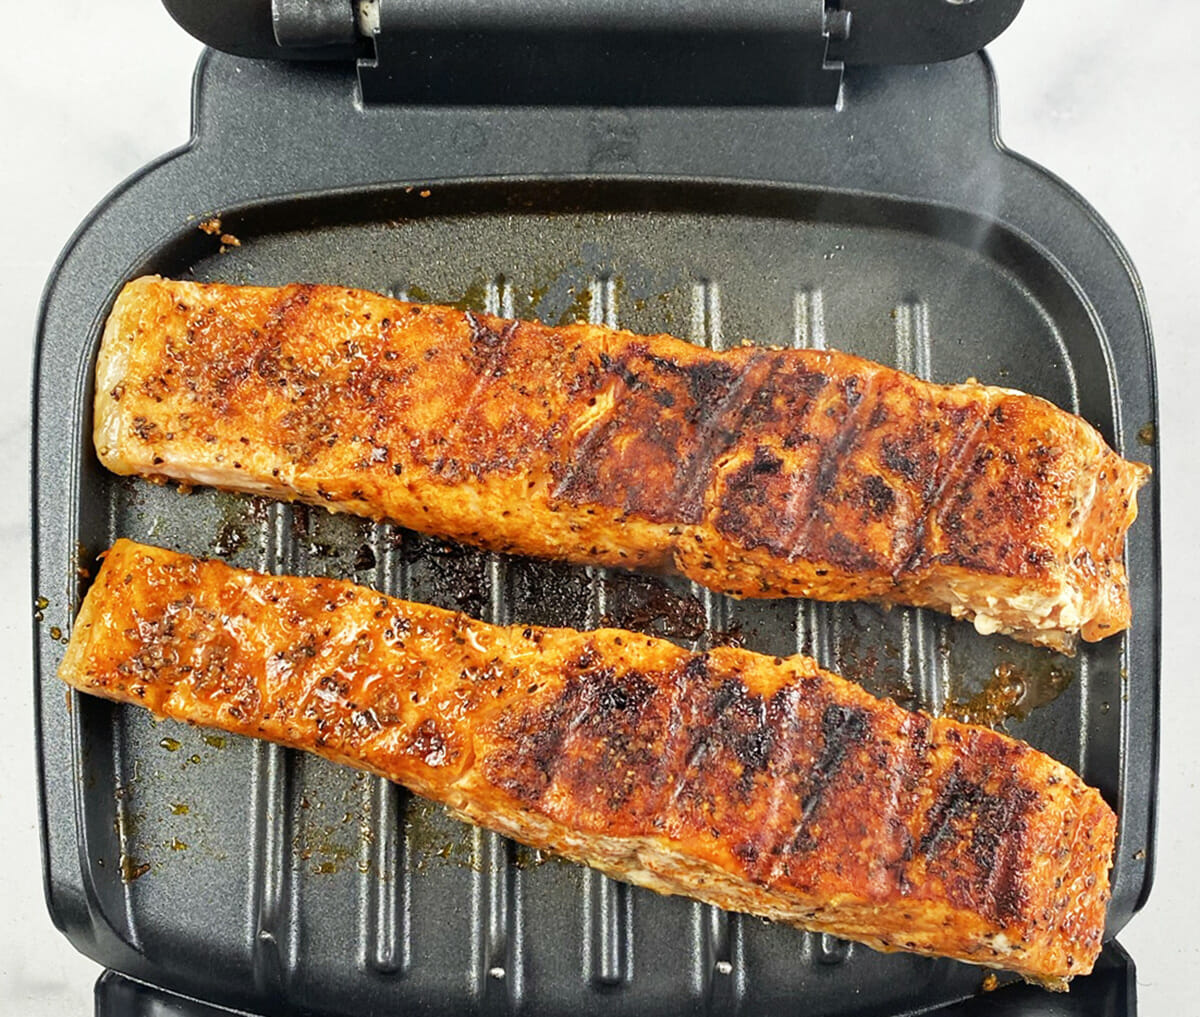 Cooking salmon filets on a George Foreman Grill